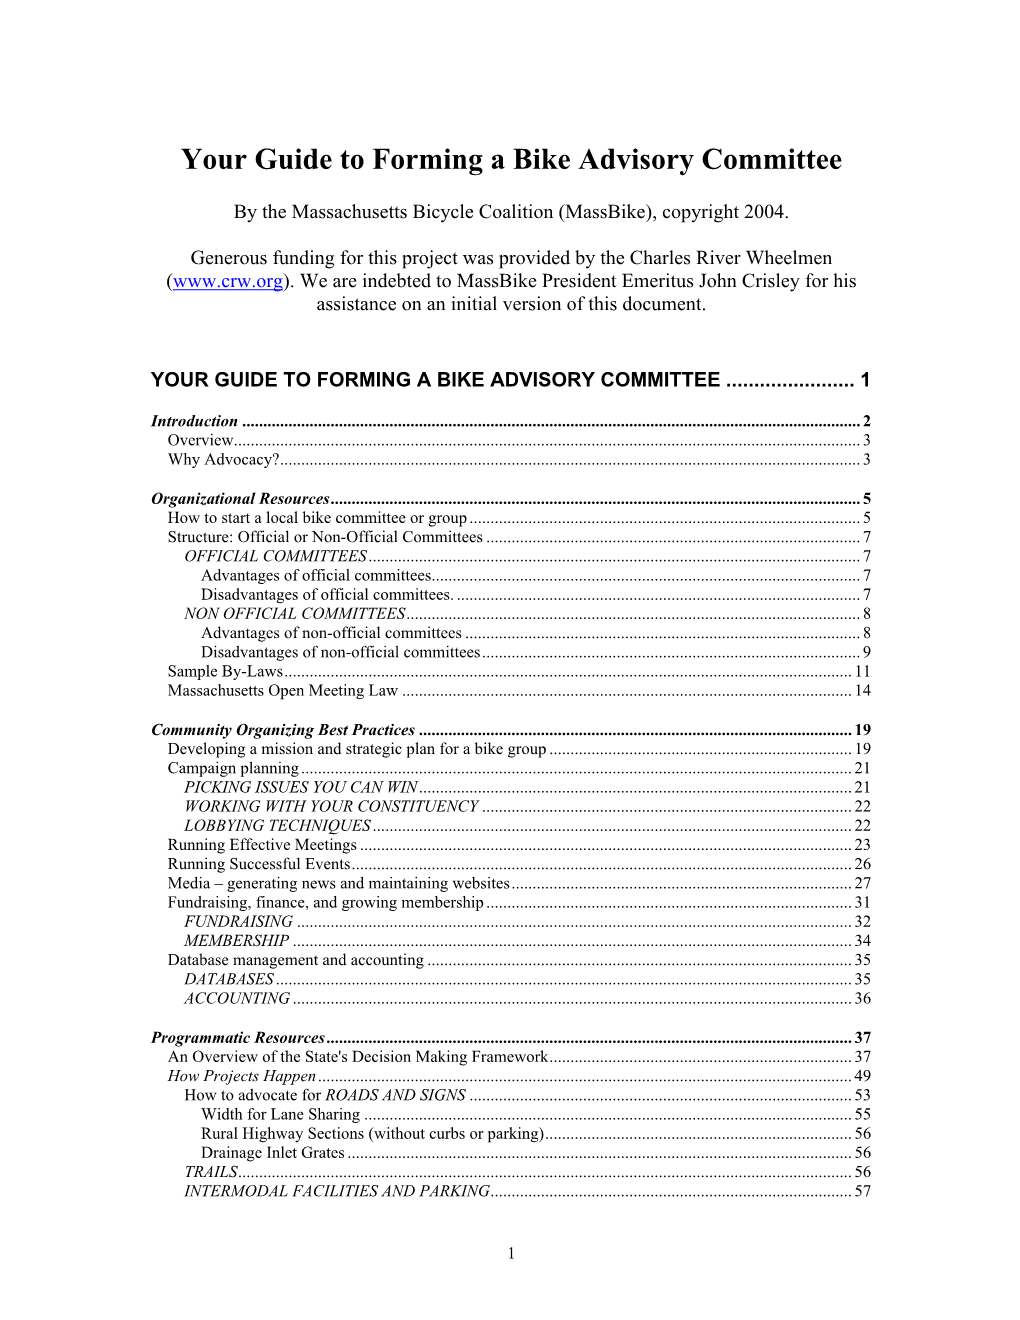 Your Guide to Forming a Bicycle Advisory Committee